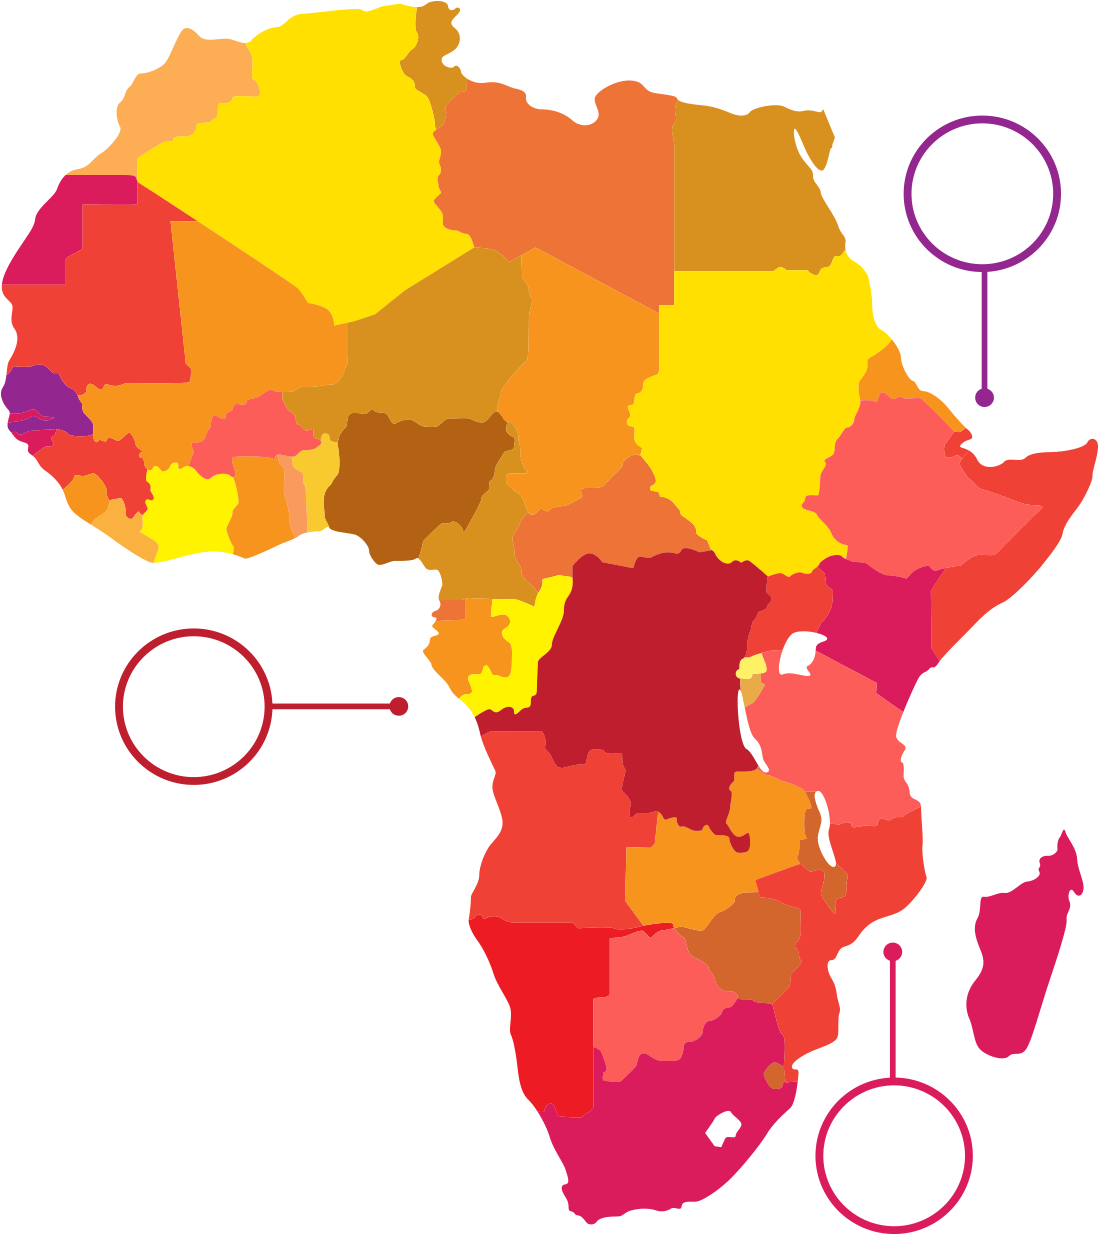 Sub-saharan Africa Russia 2018 Fifa World Cup African - Learn The Countries Of Africa (1500x1500)